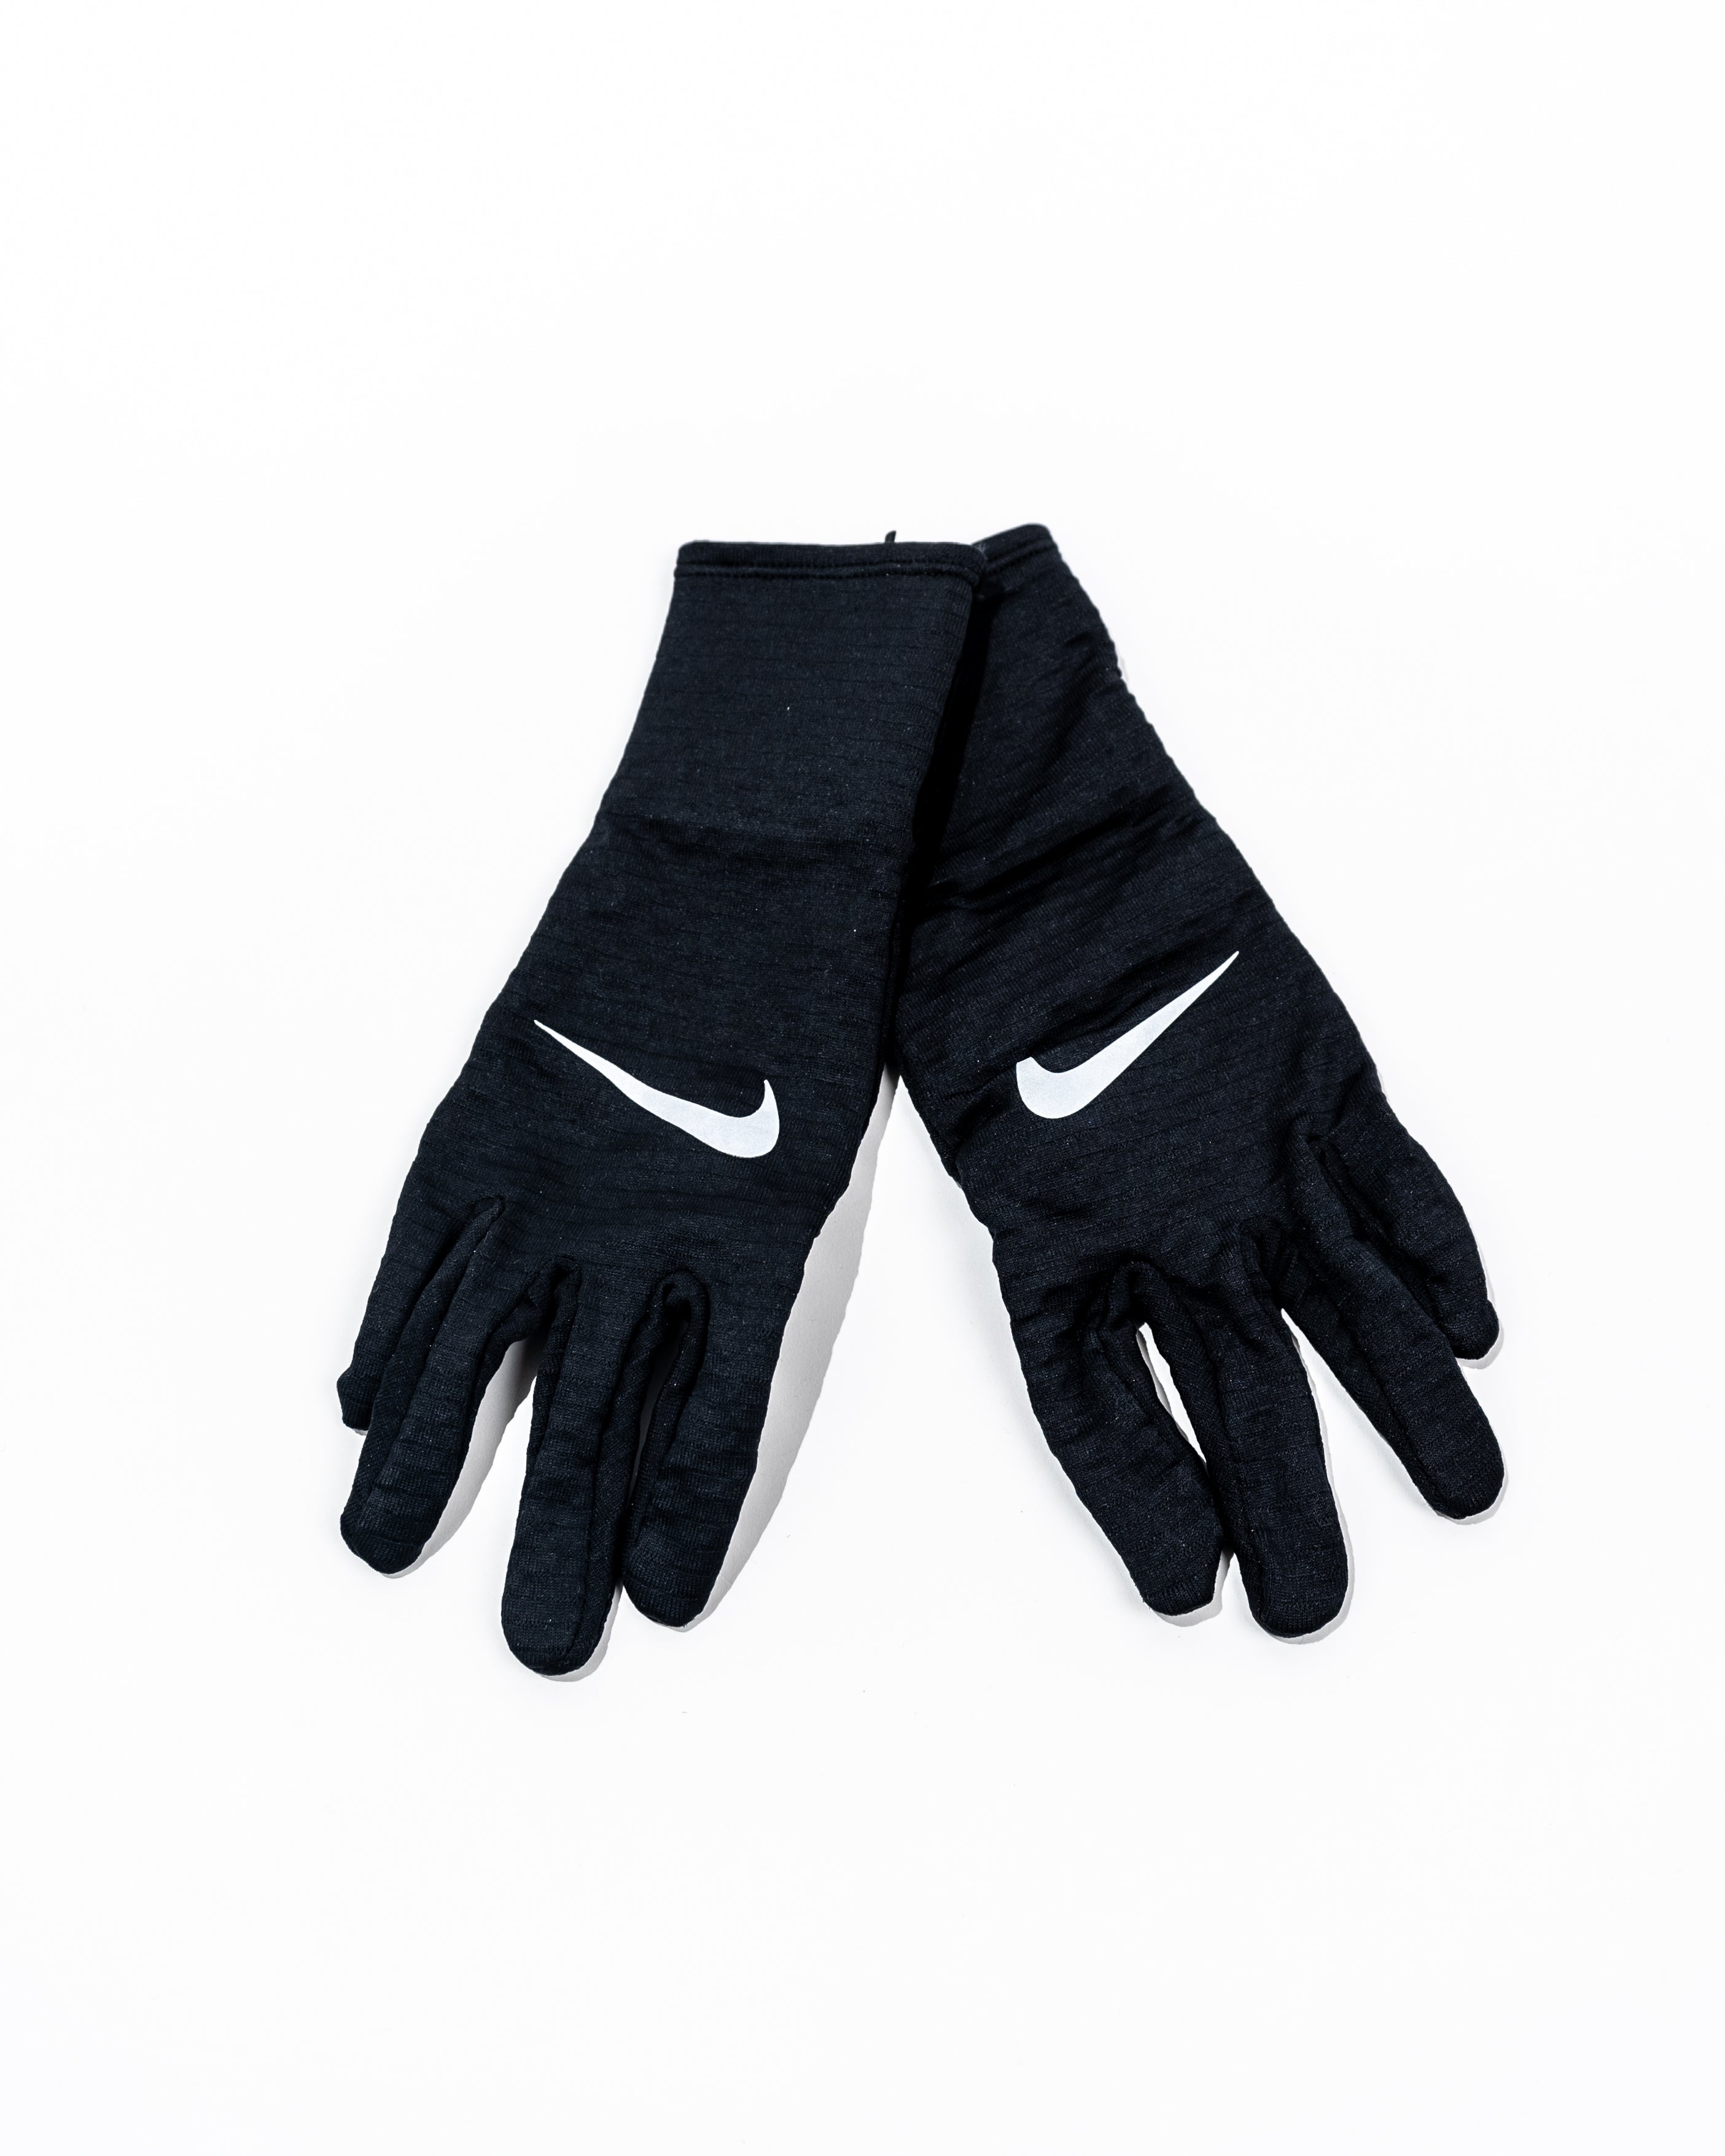 Nike Women's Therma-FIT Gloves